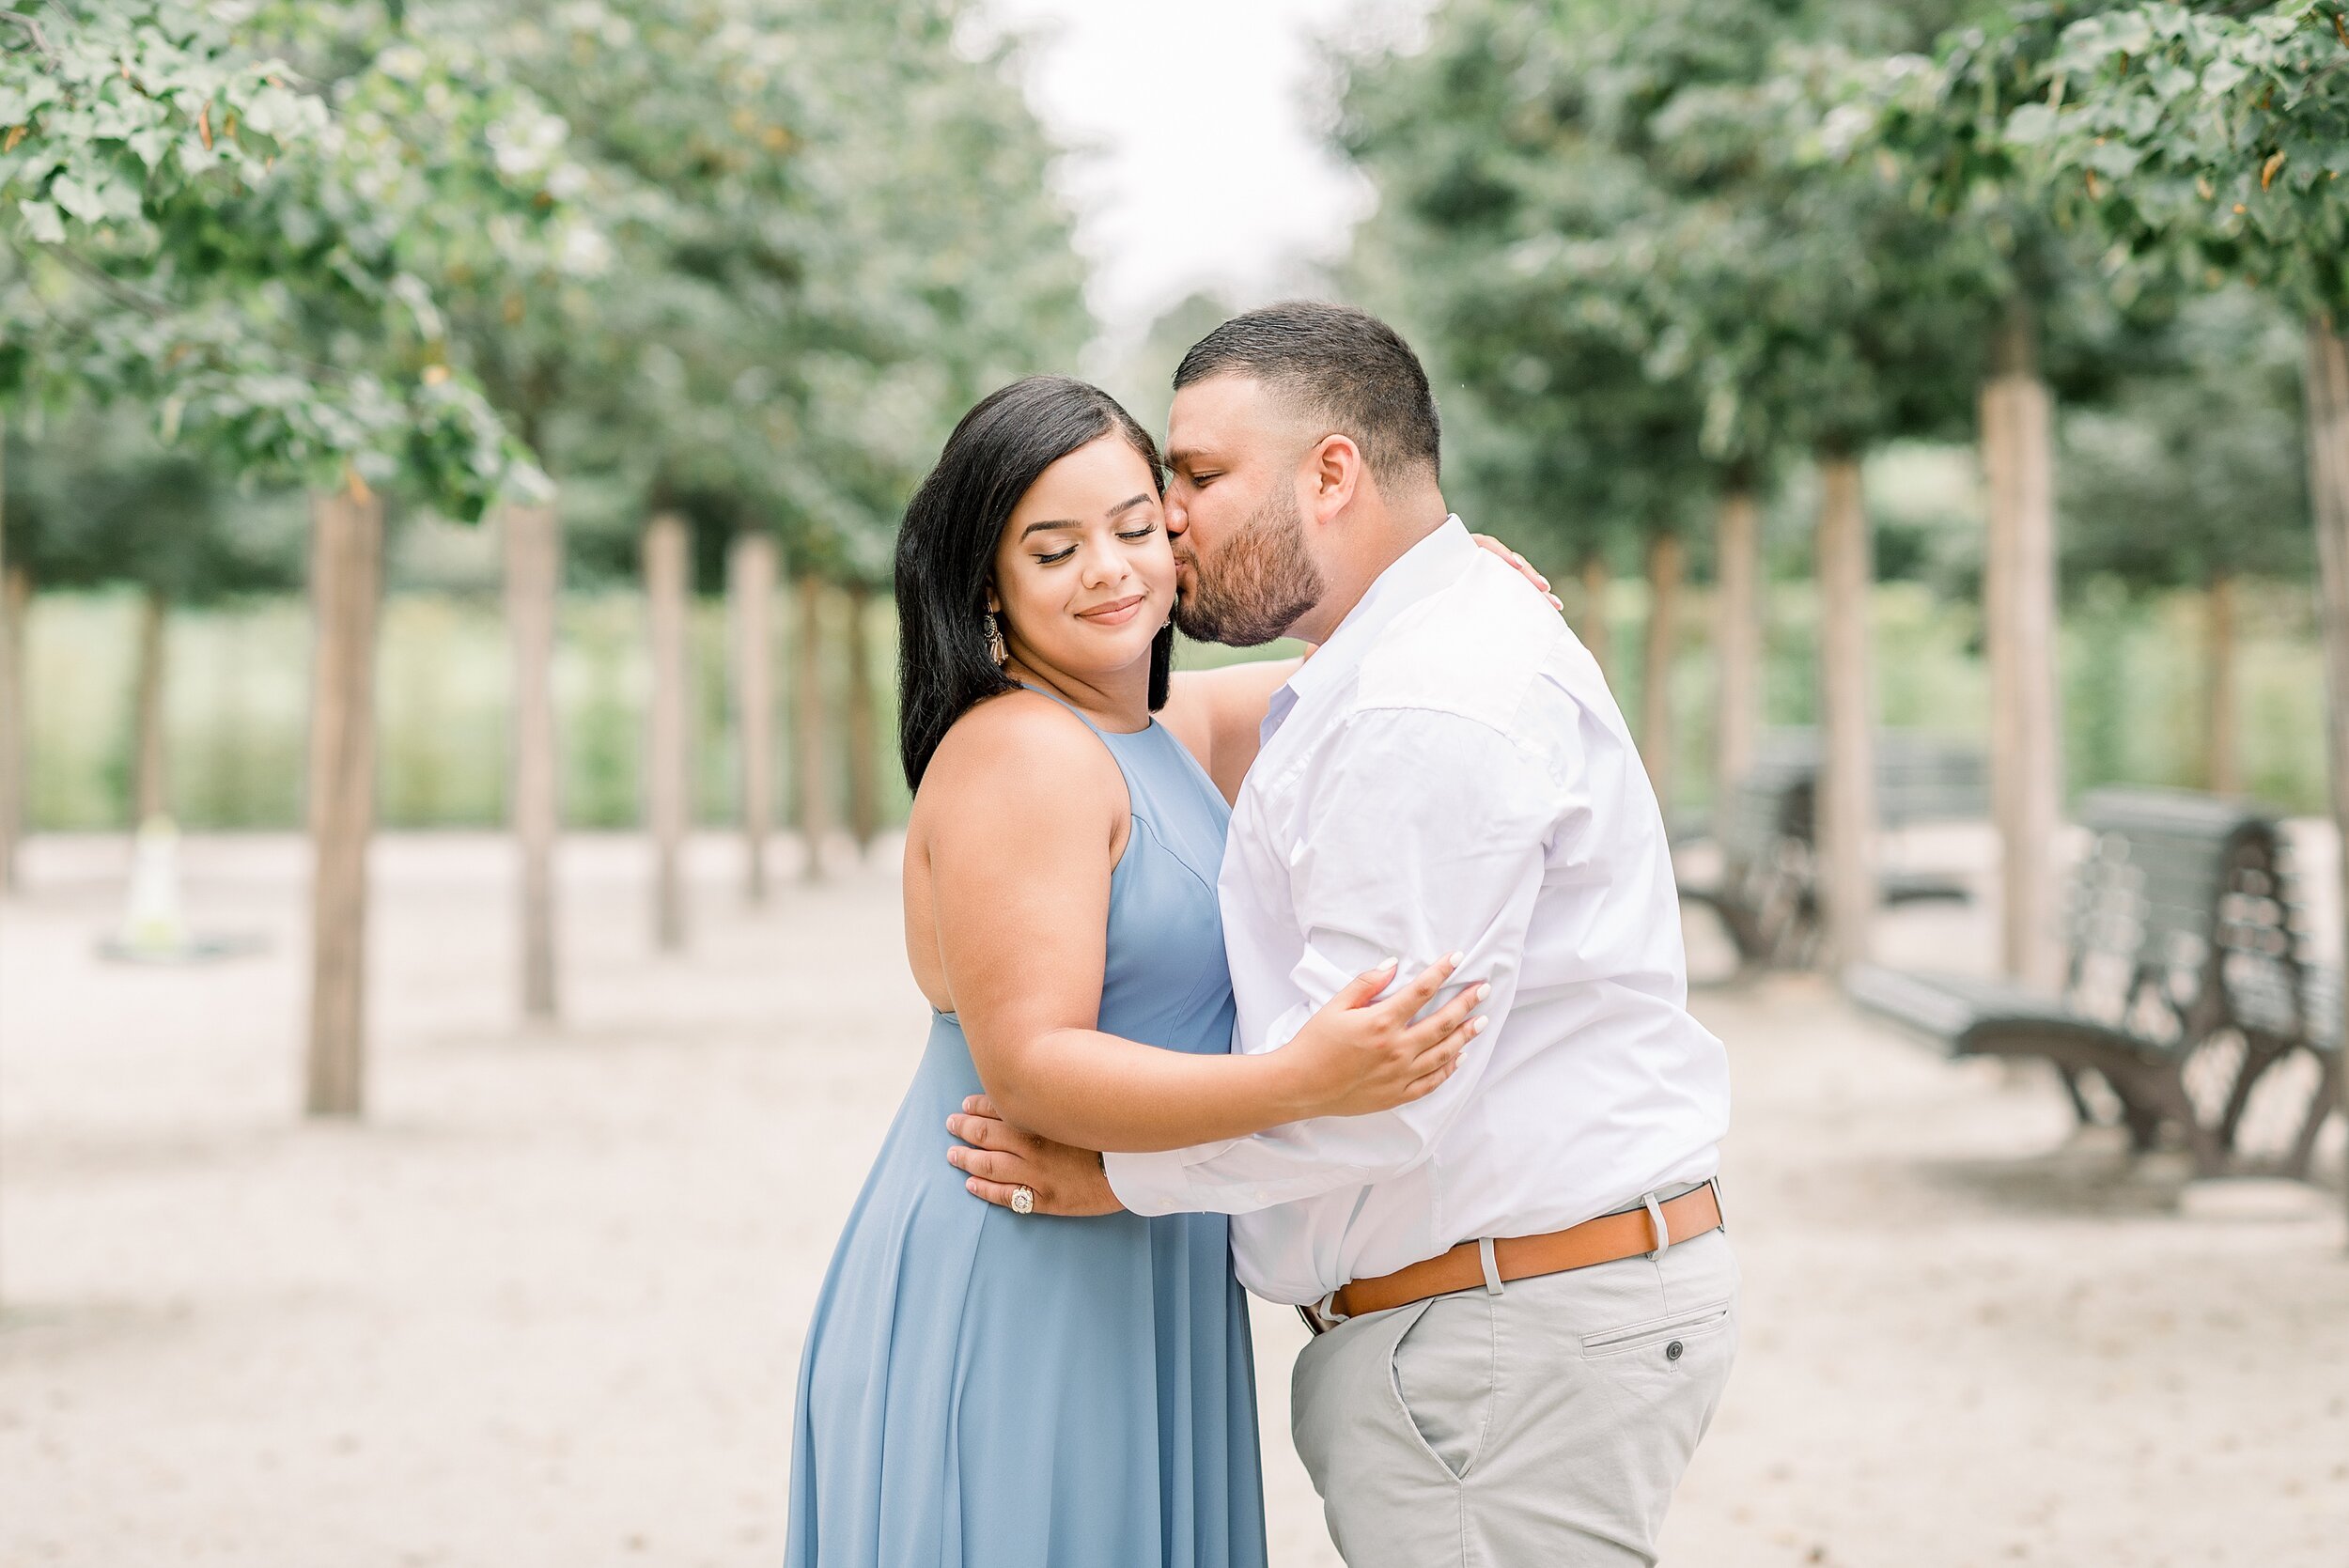 Longwood Gardens Kennet Square Pa Summer Engagement Session Photography_7656.jpg